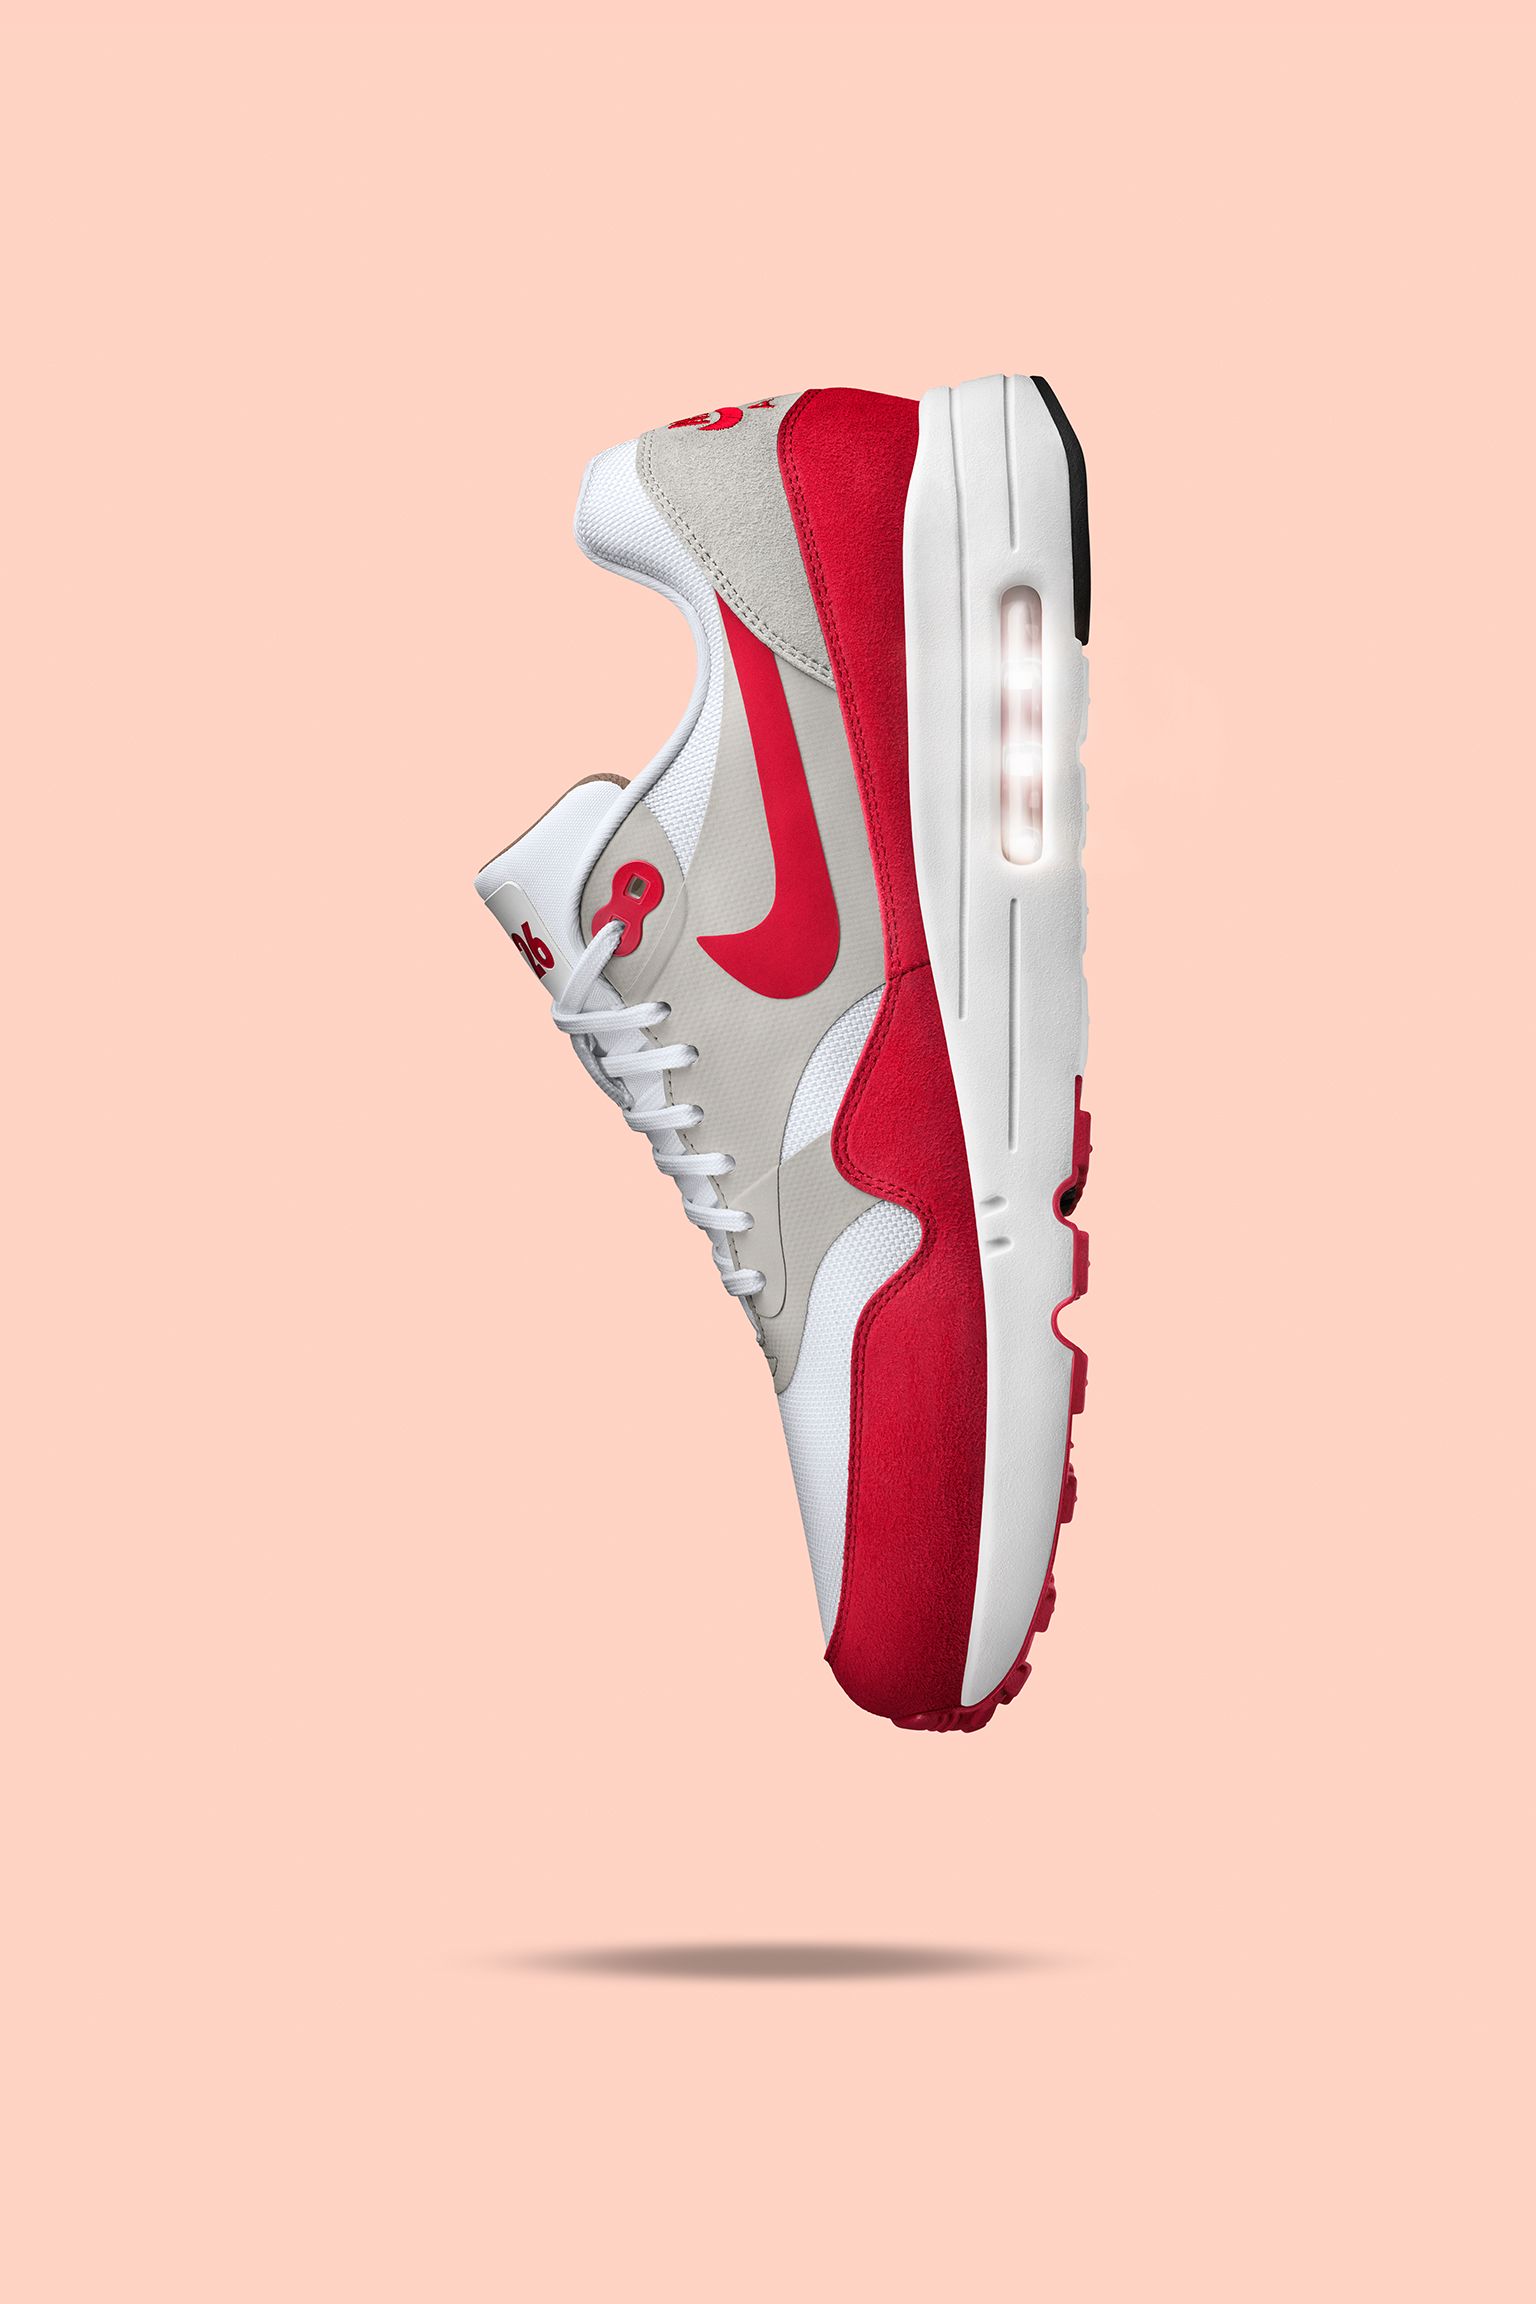 Many dangerous situations end point damage Nike Air Max 1 Ultra 2.0 LE 'White & University Red'. Nike SNKRS